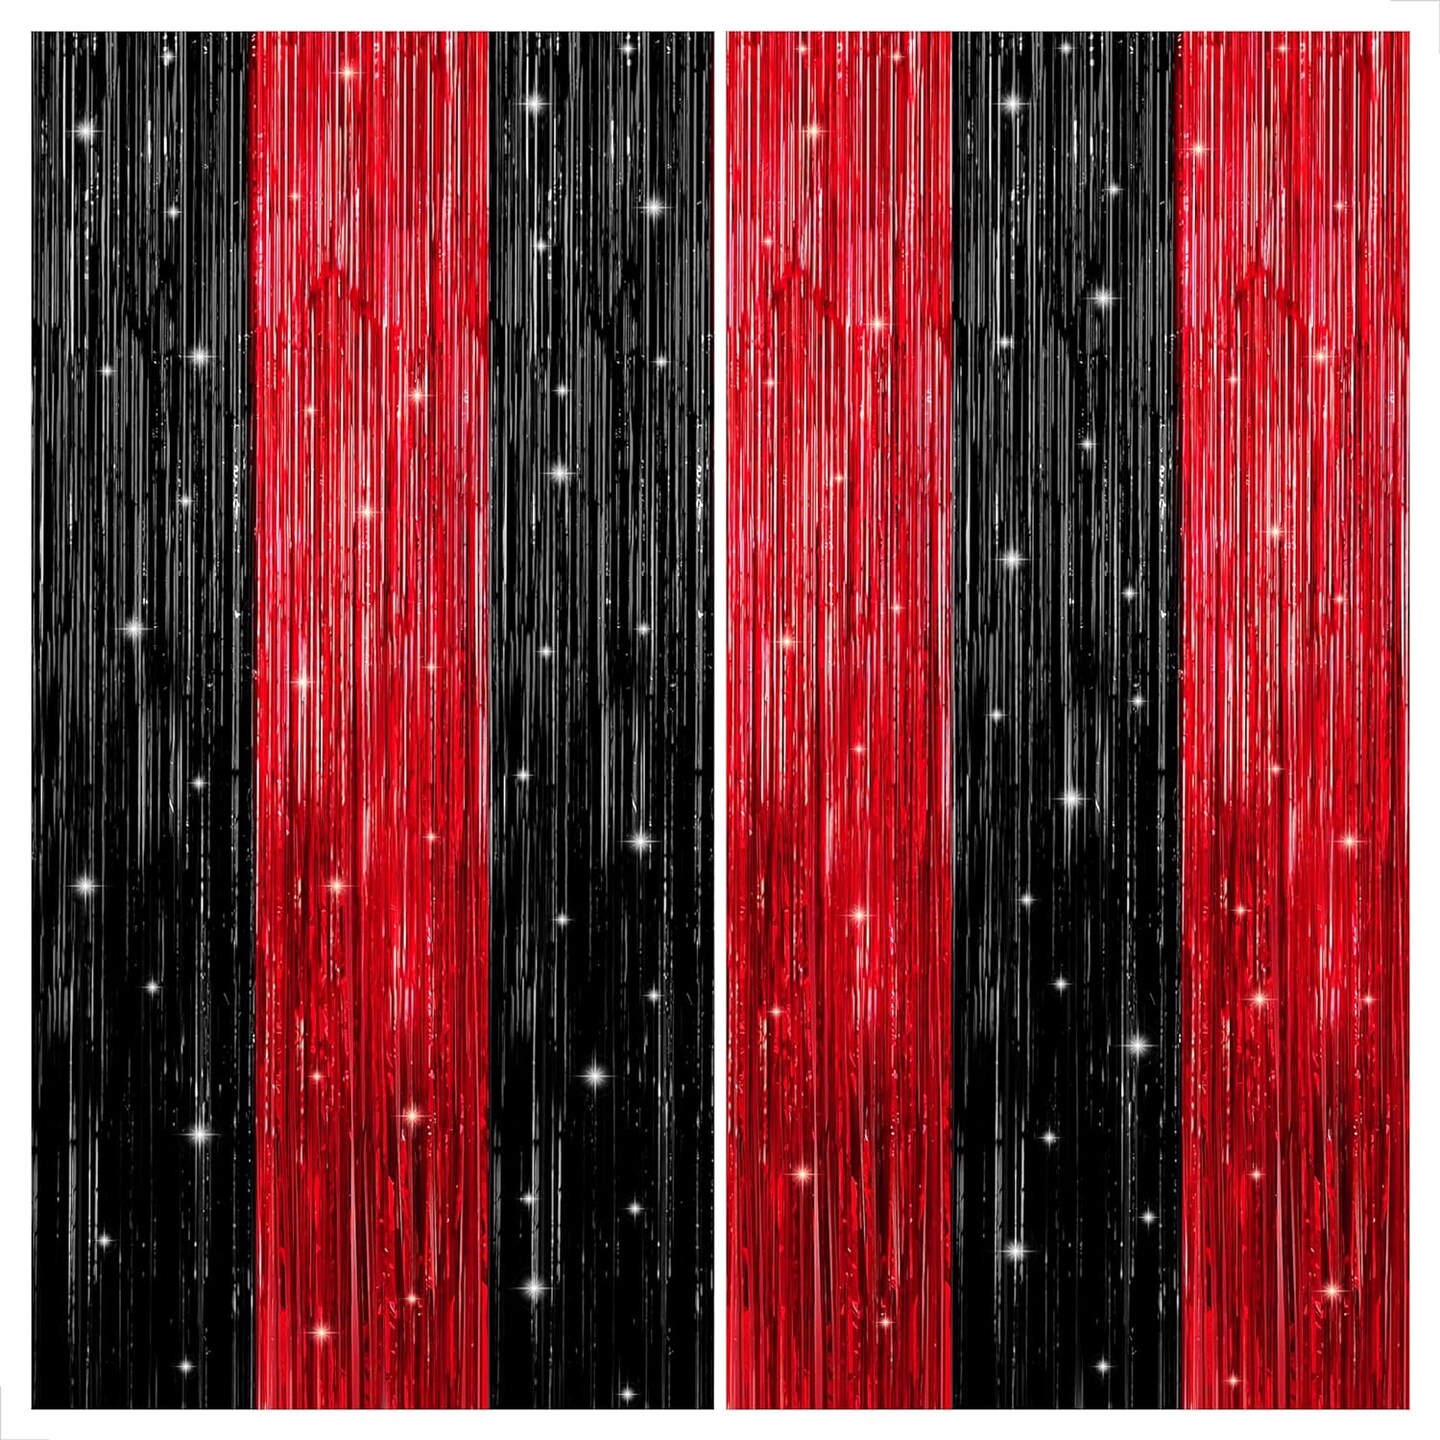 Red and Black Fringe Curtain - Pack of 2 XtraLarge, 8x6.4 Feet | Red and Black Backdrop Curtain for Red and Black Party Decorations | Sneaker Ball Decorations | Casino Theme Party Decorations